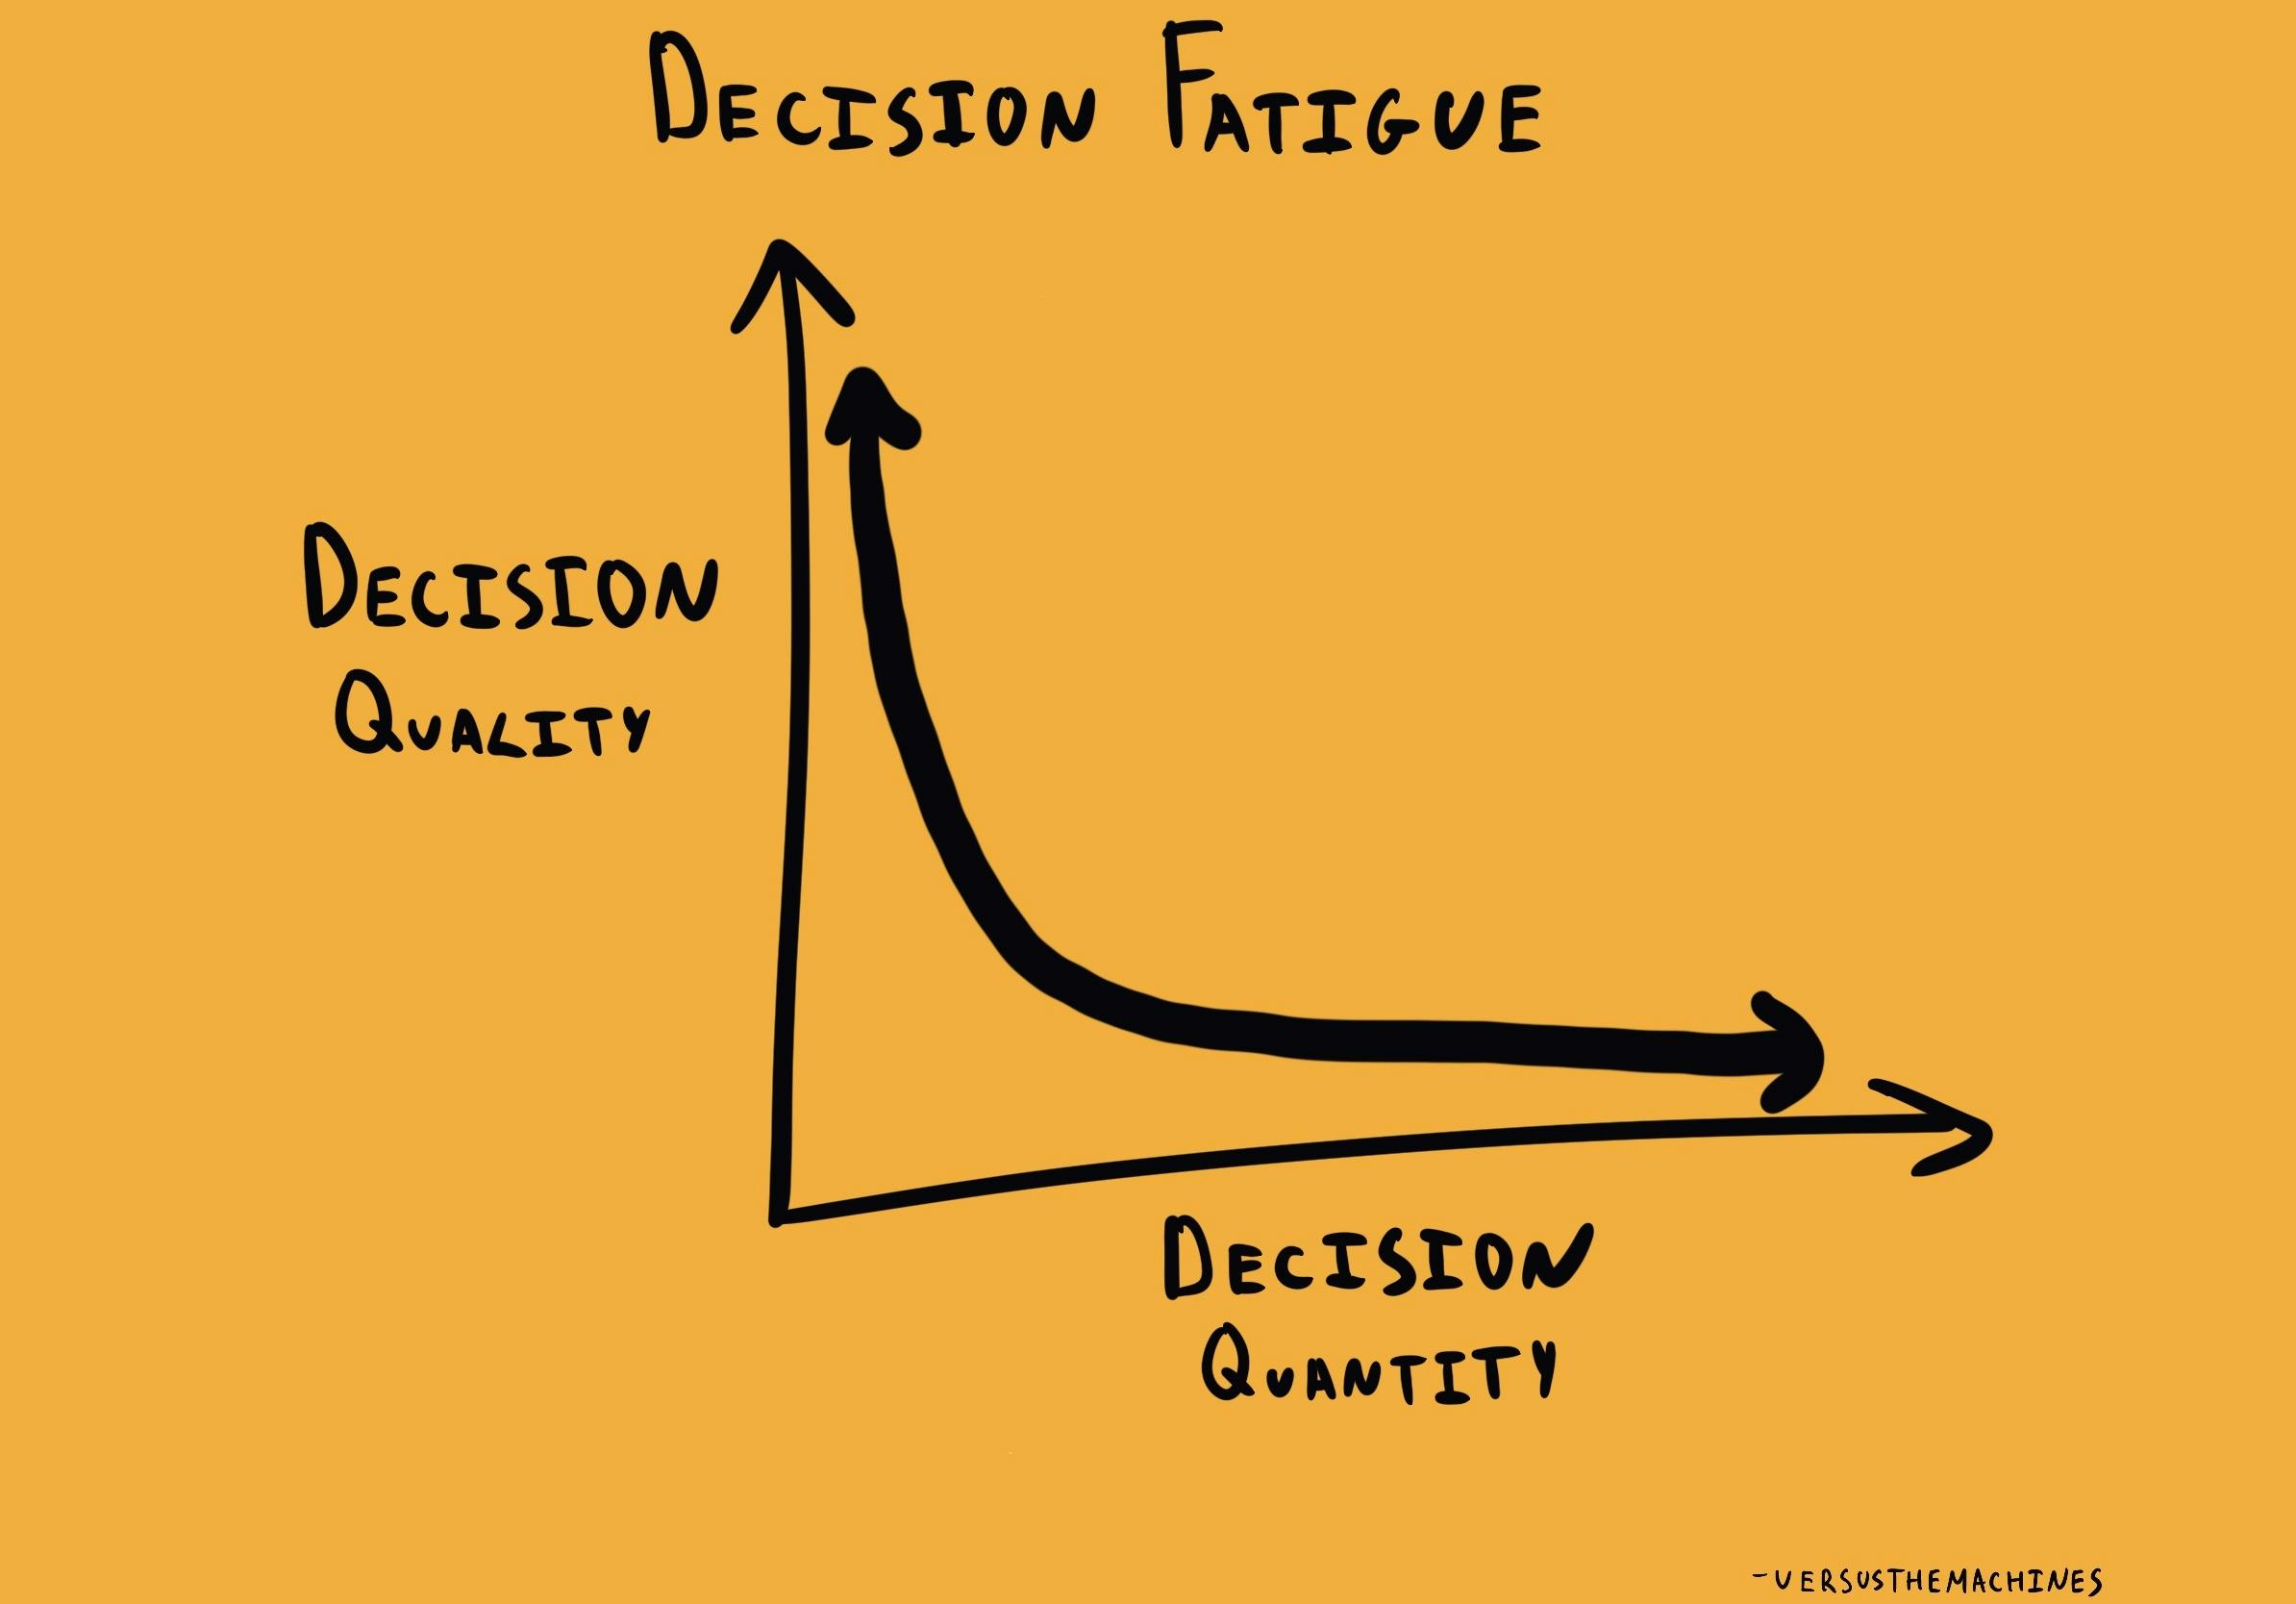 Mental fatigue and decision making